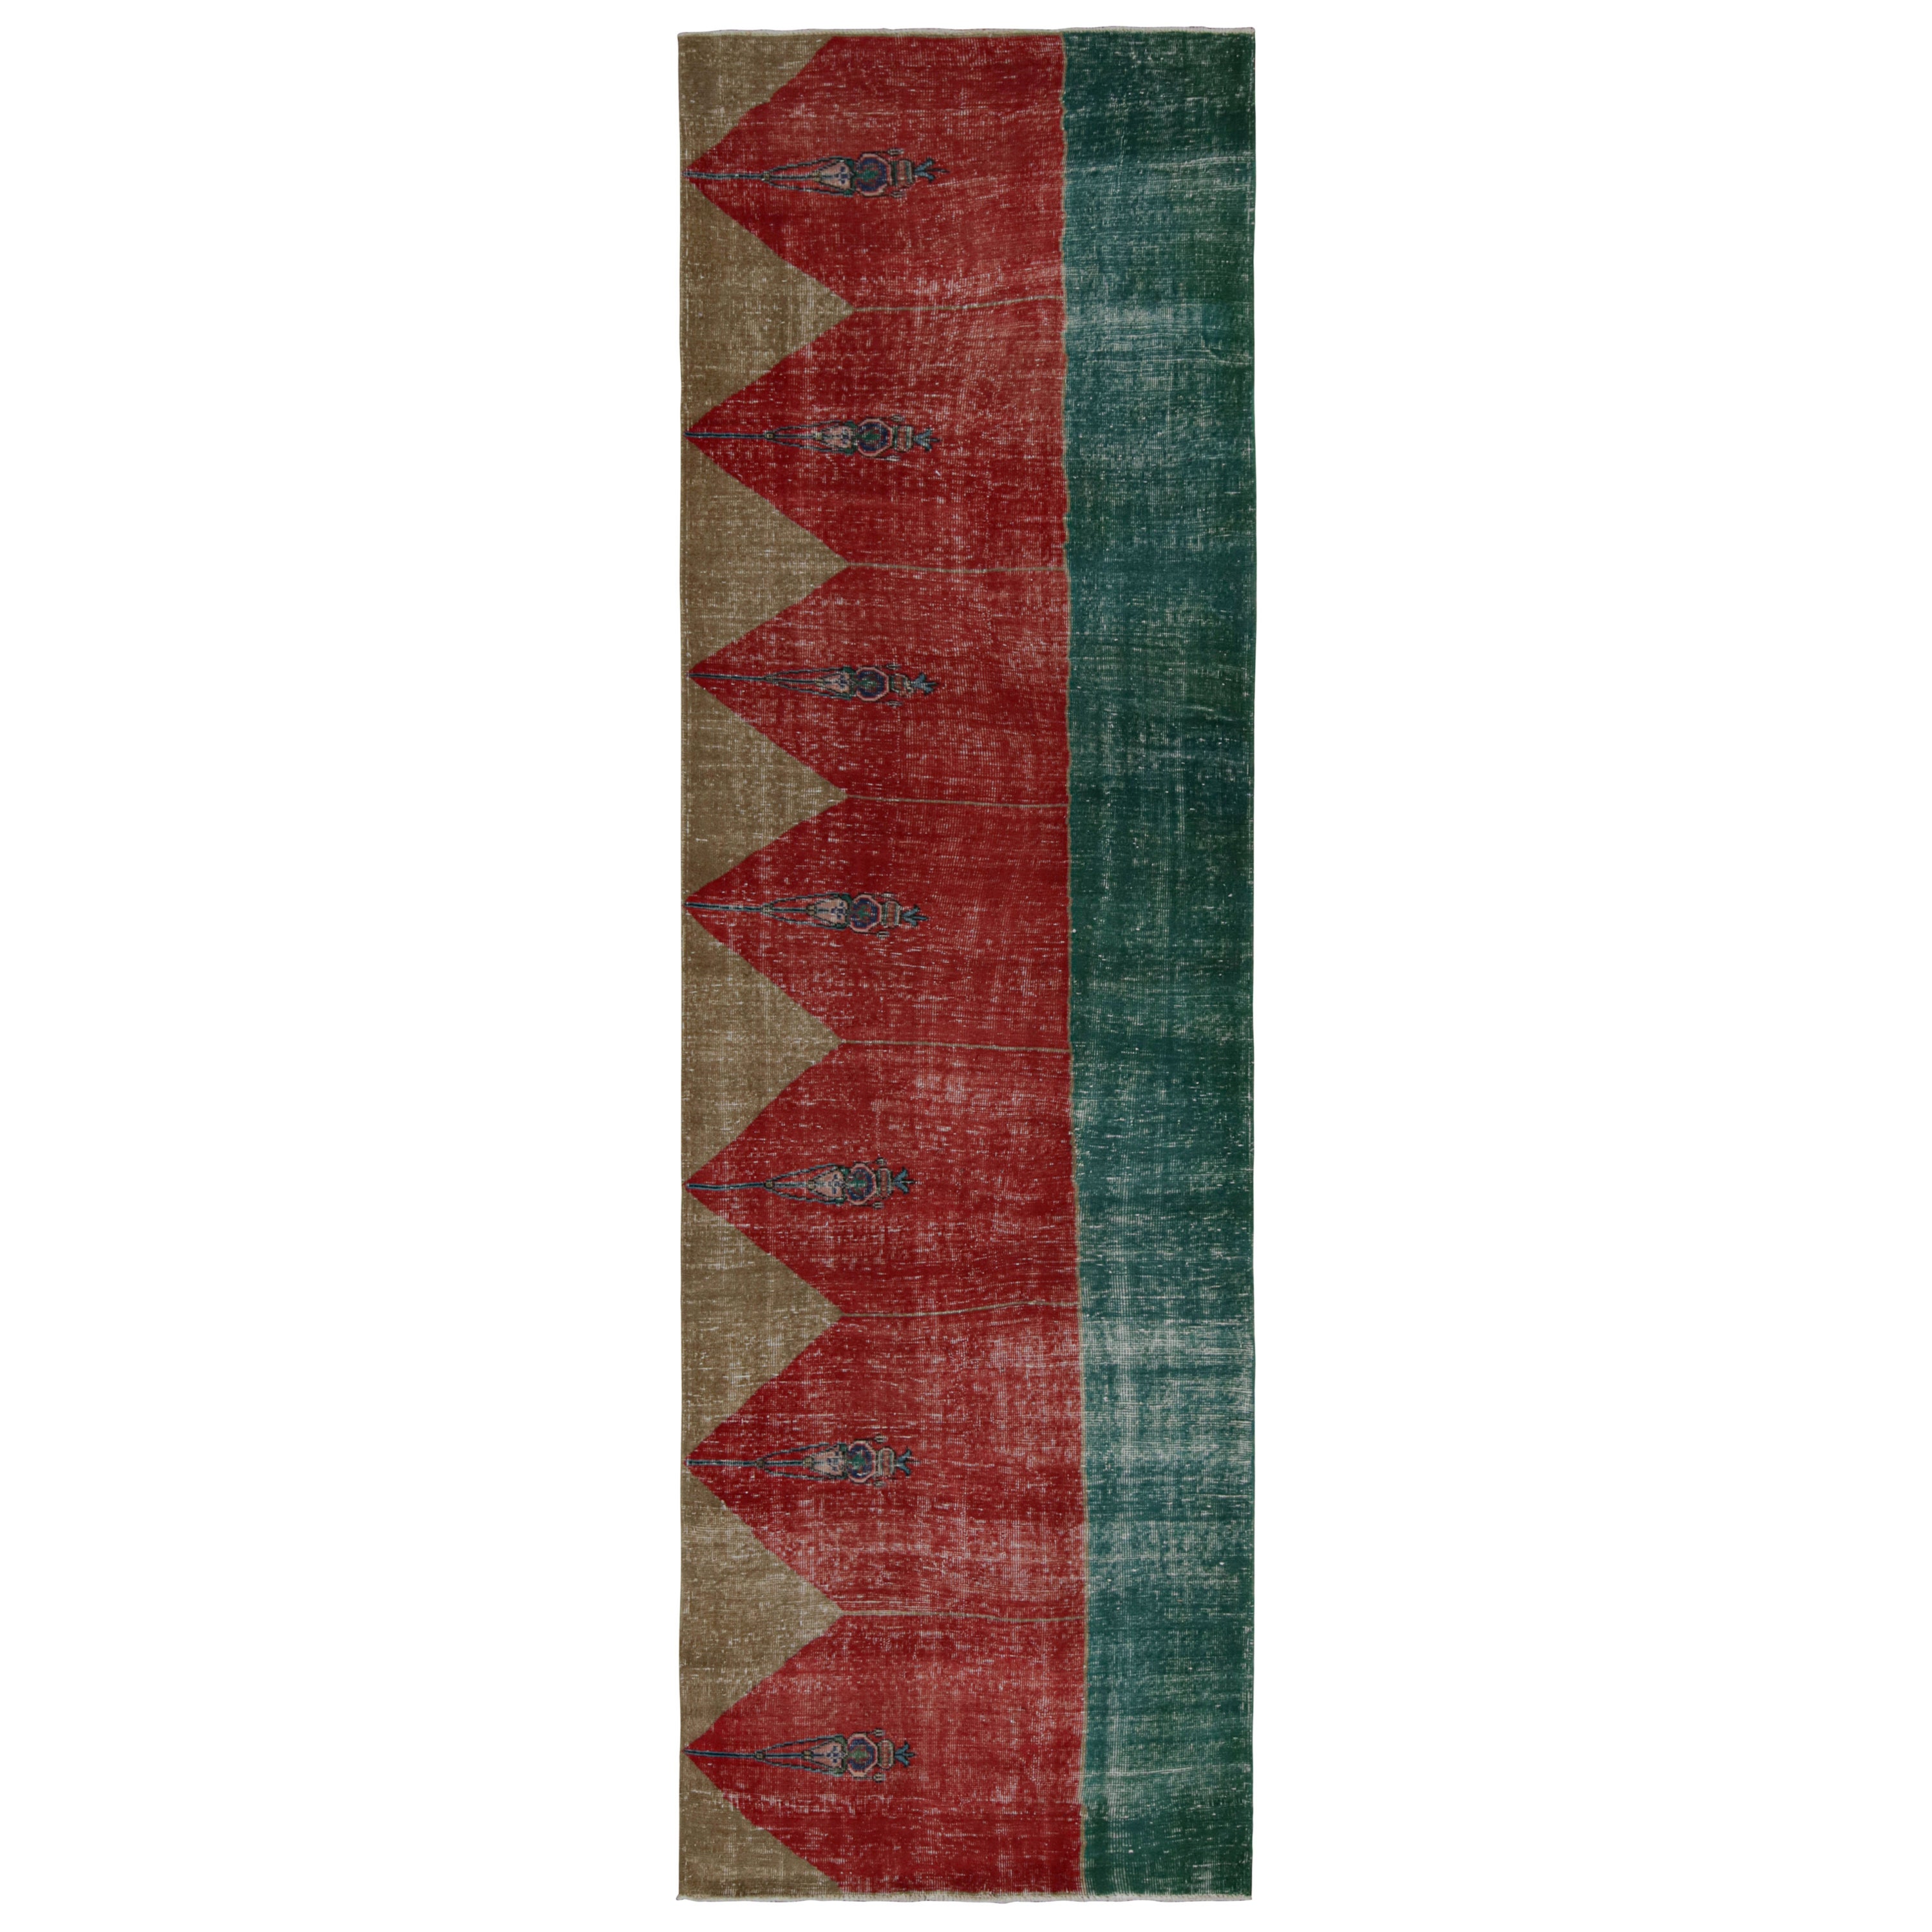 Vintage Turkish runner rug in Red, Teal and Gold Patterns by Rug & Kilim For Sale